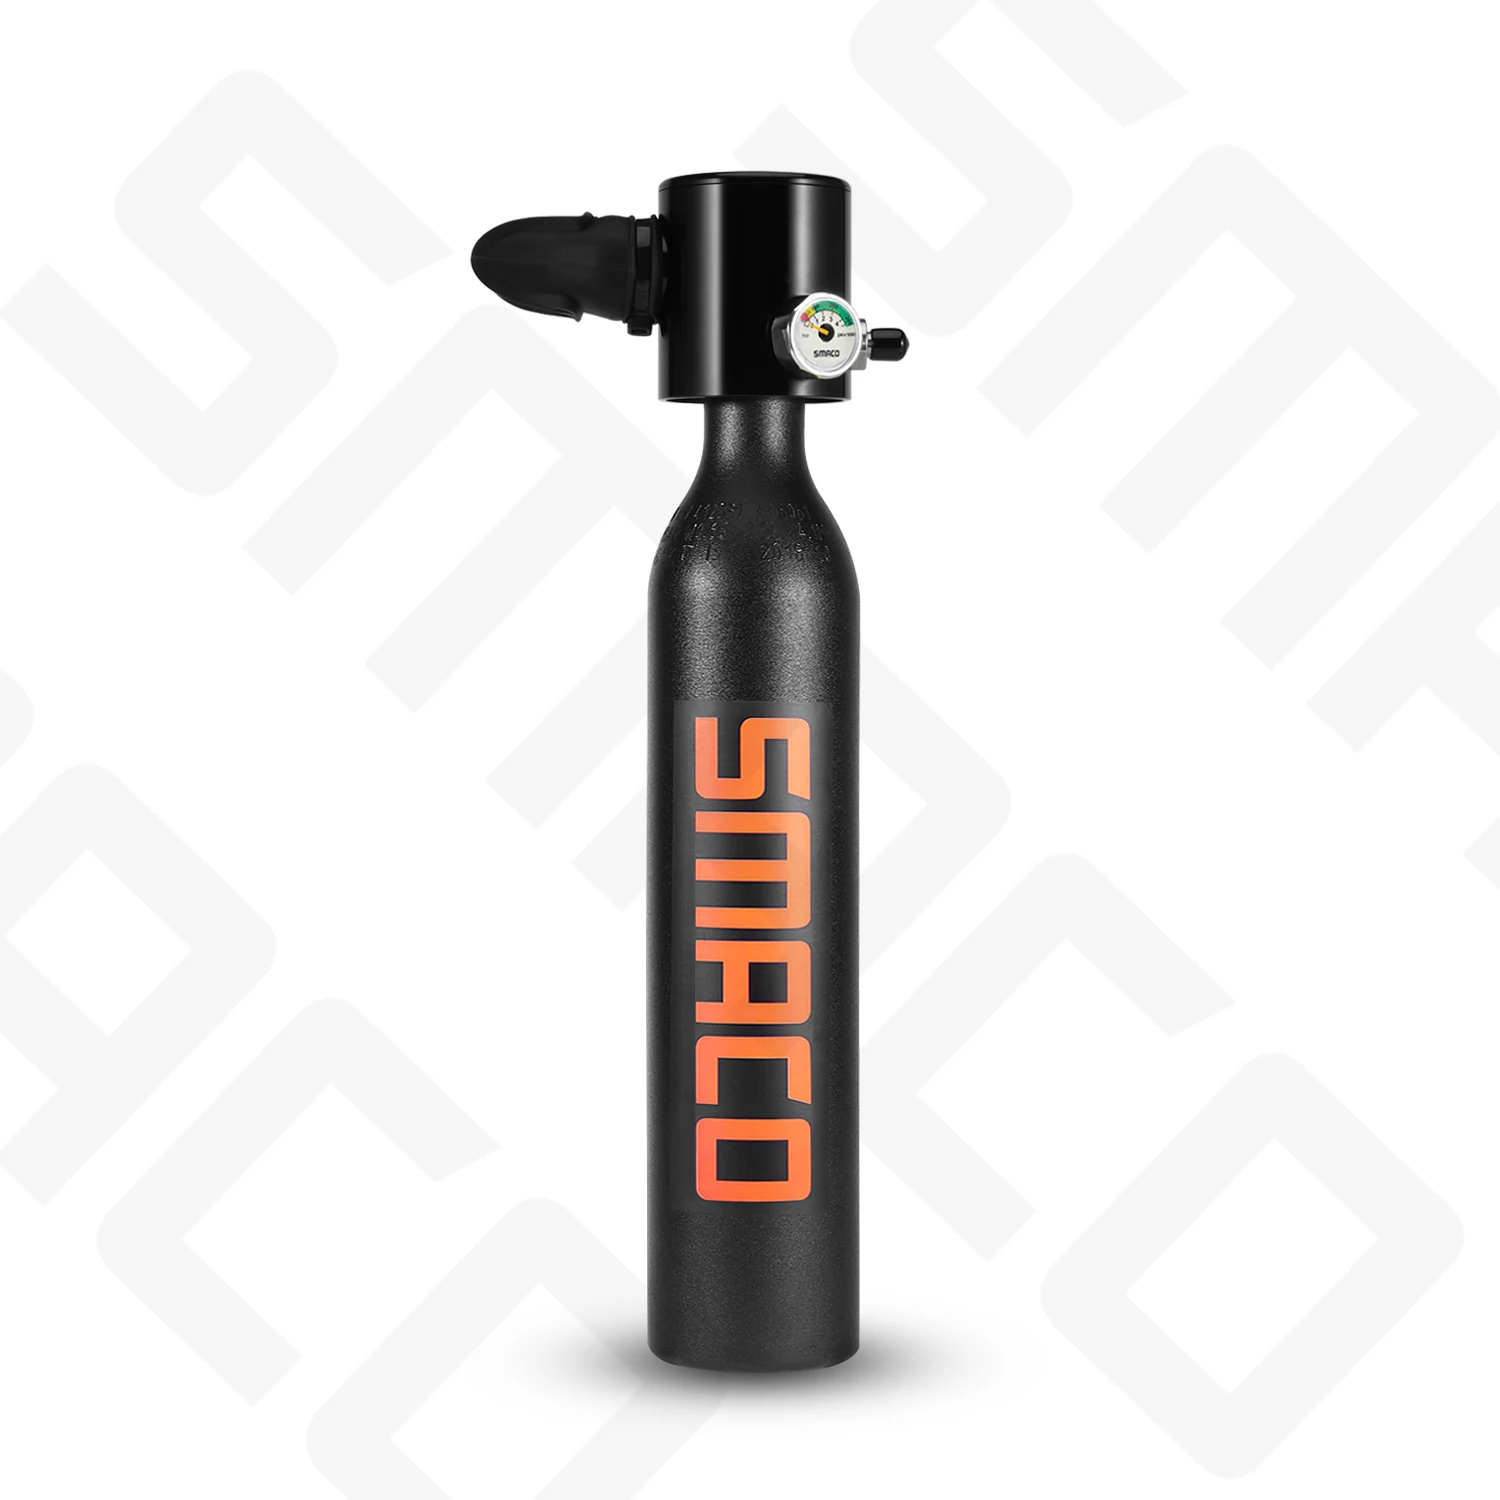 SMACO Diving Equipment oxygen cylinder set Mini scuba tank total freedom breath underwater for 5 to 10 minutes